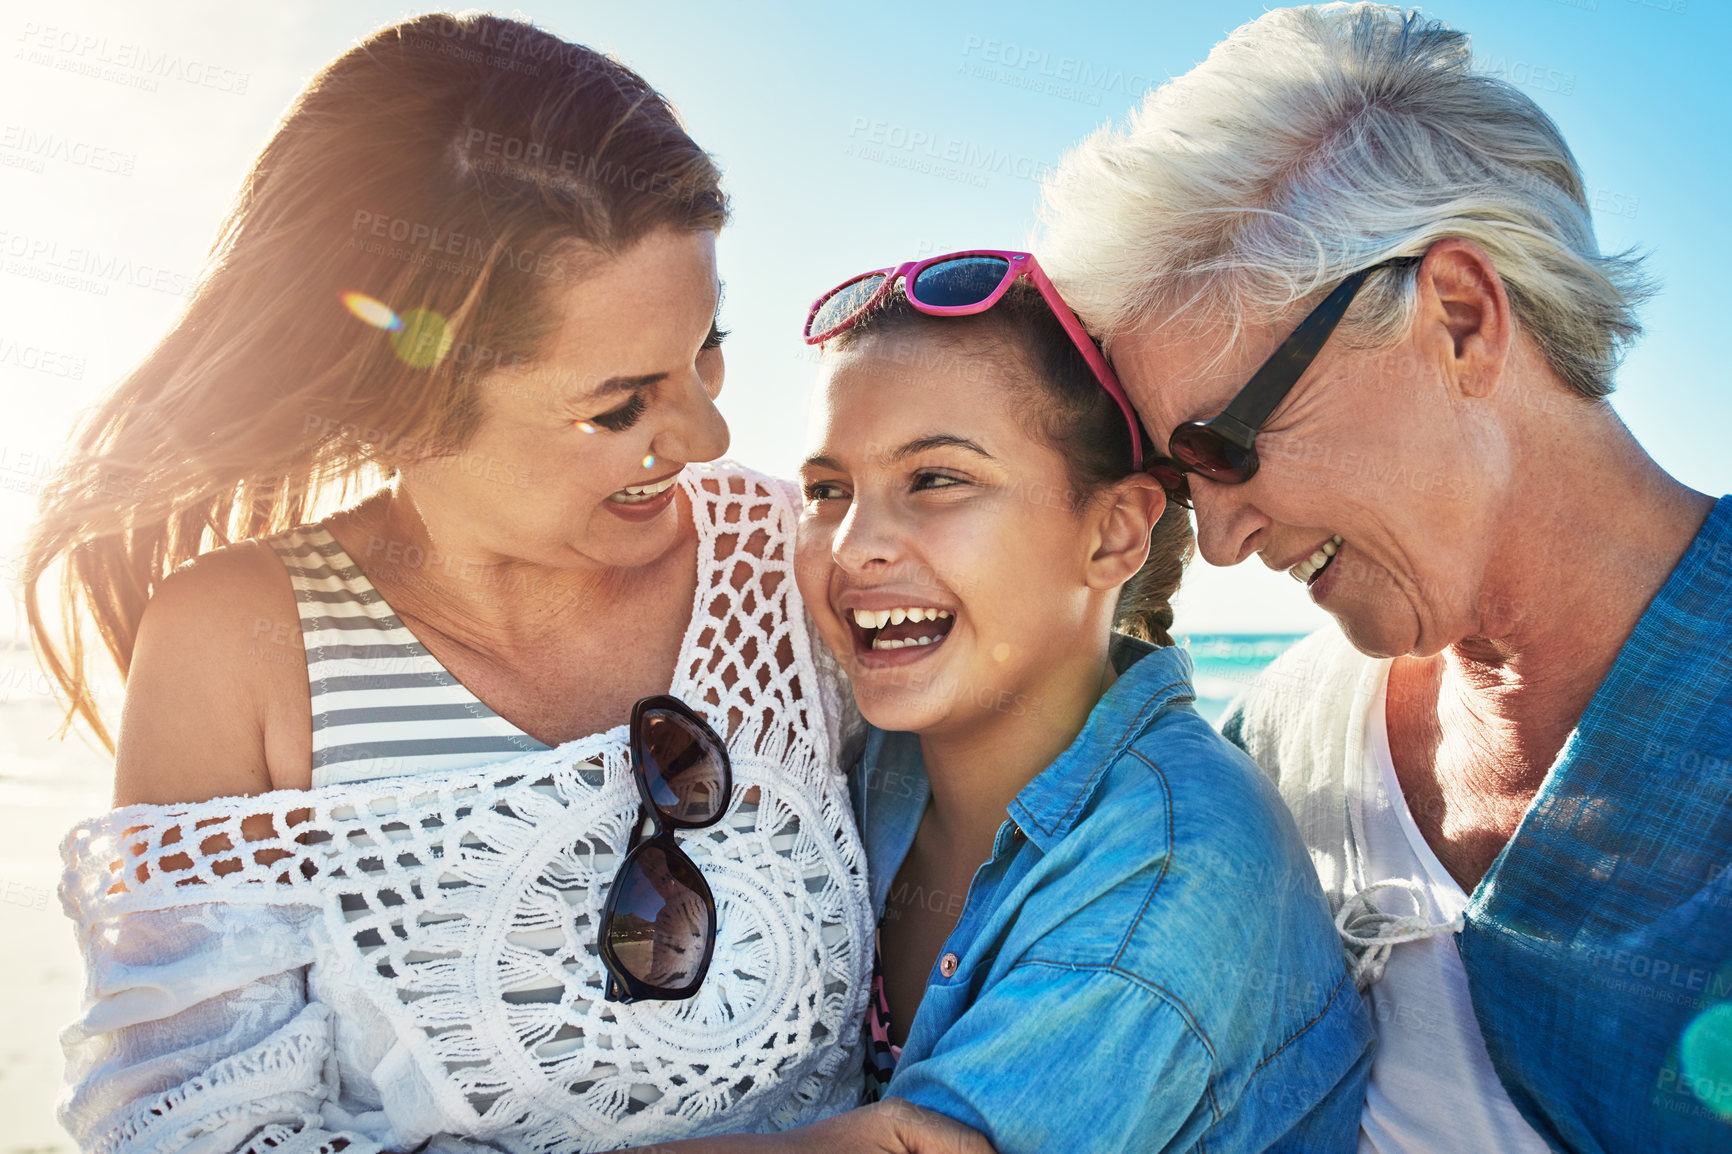 Buy stock photo Cropped shot of a senior woman spending the day at the beach with her daughter and granddaughter